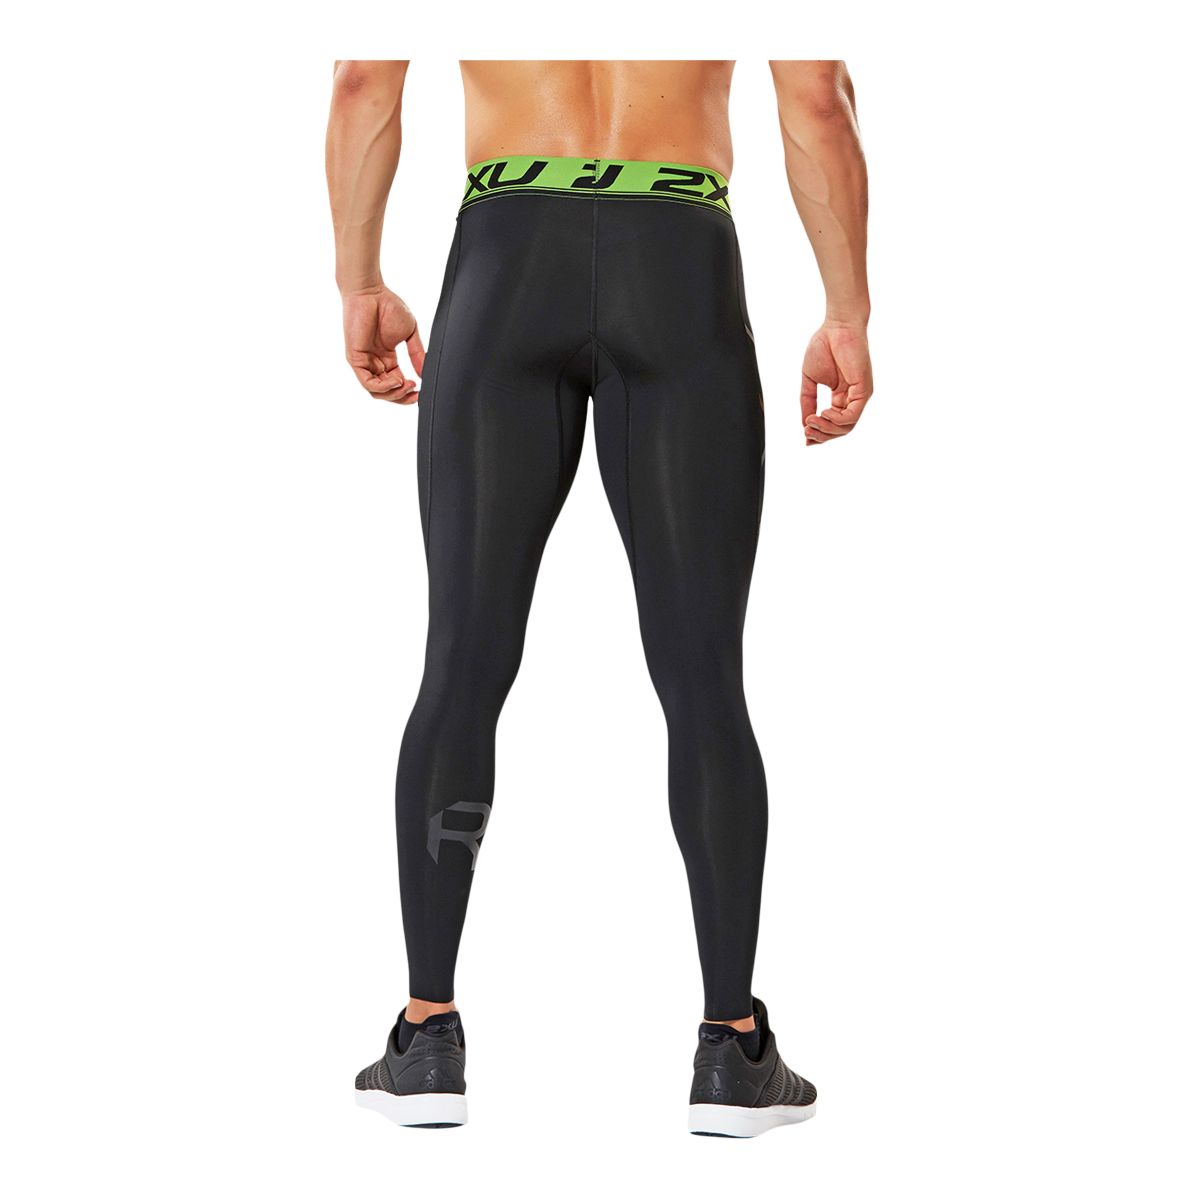 Under Armour Mens Recovery Compression Tights (Black/Metallic Silver)